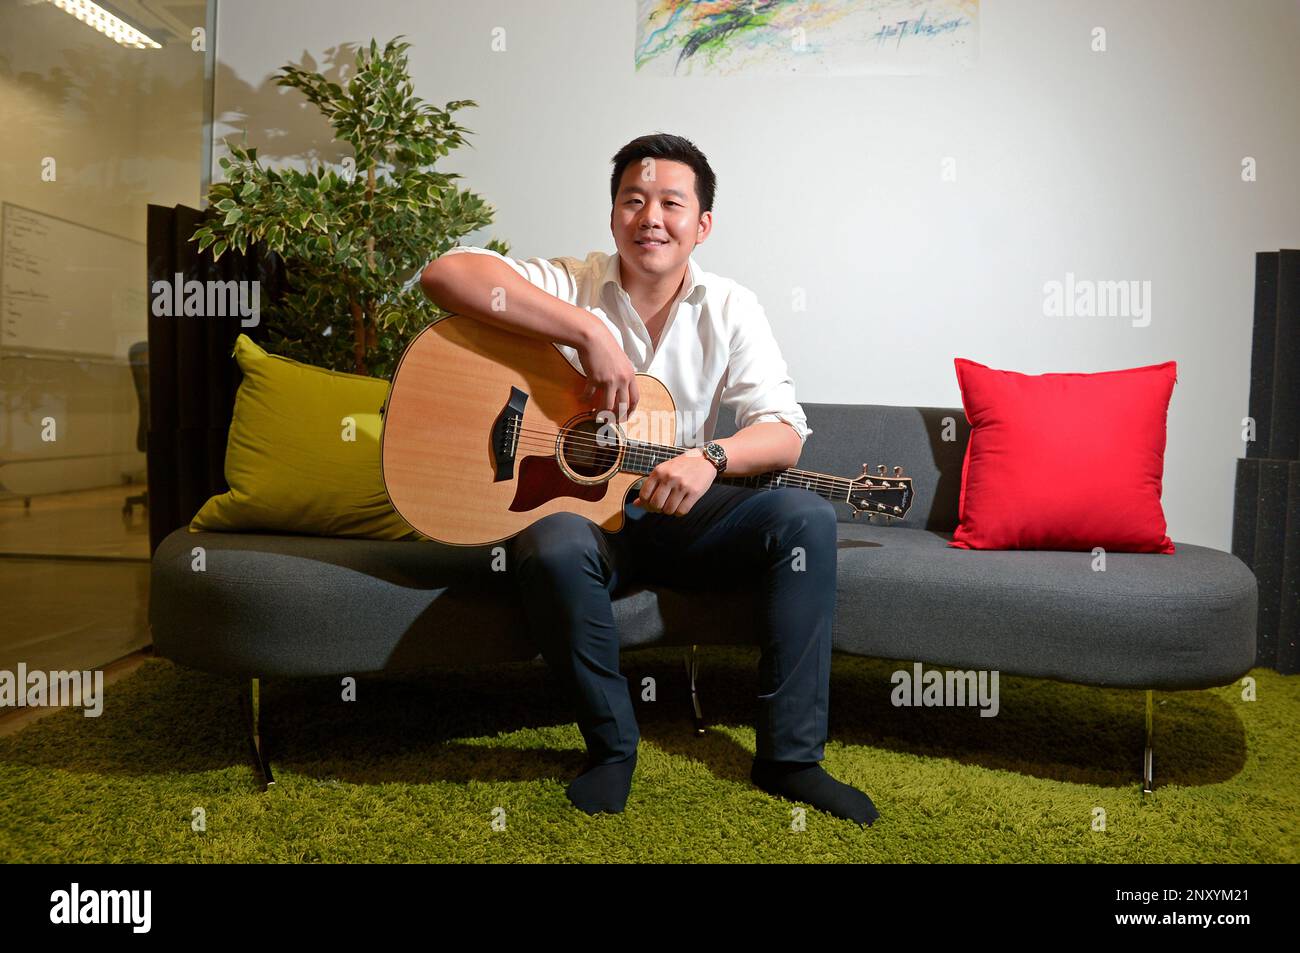 Mr Kuok Meng Ru, CEO of BandLab Technologies, which acquired a 49 per cent stake of American pop-culture magazine Rolling Stone in 2016. He has not confirmed whether he has bought the remaining 51 per cent from the magazine's parent company which was put up for sale in September this year. (Singapore Press via AP Images) Stock Photo